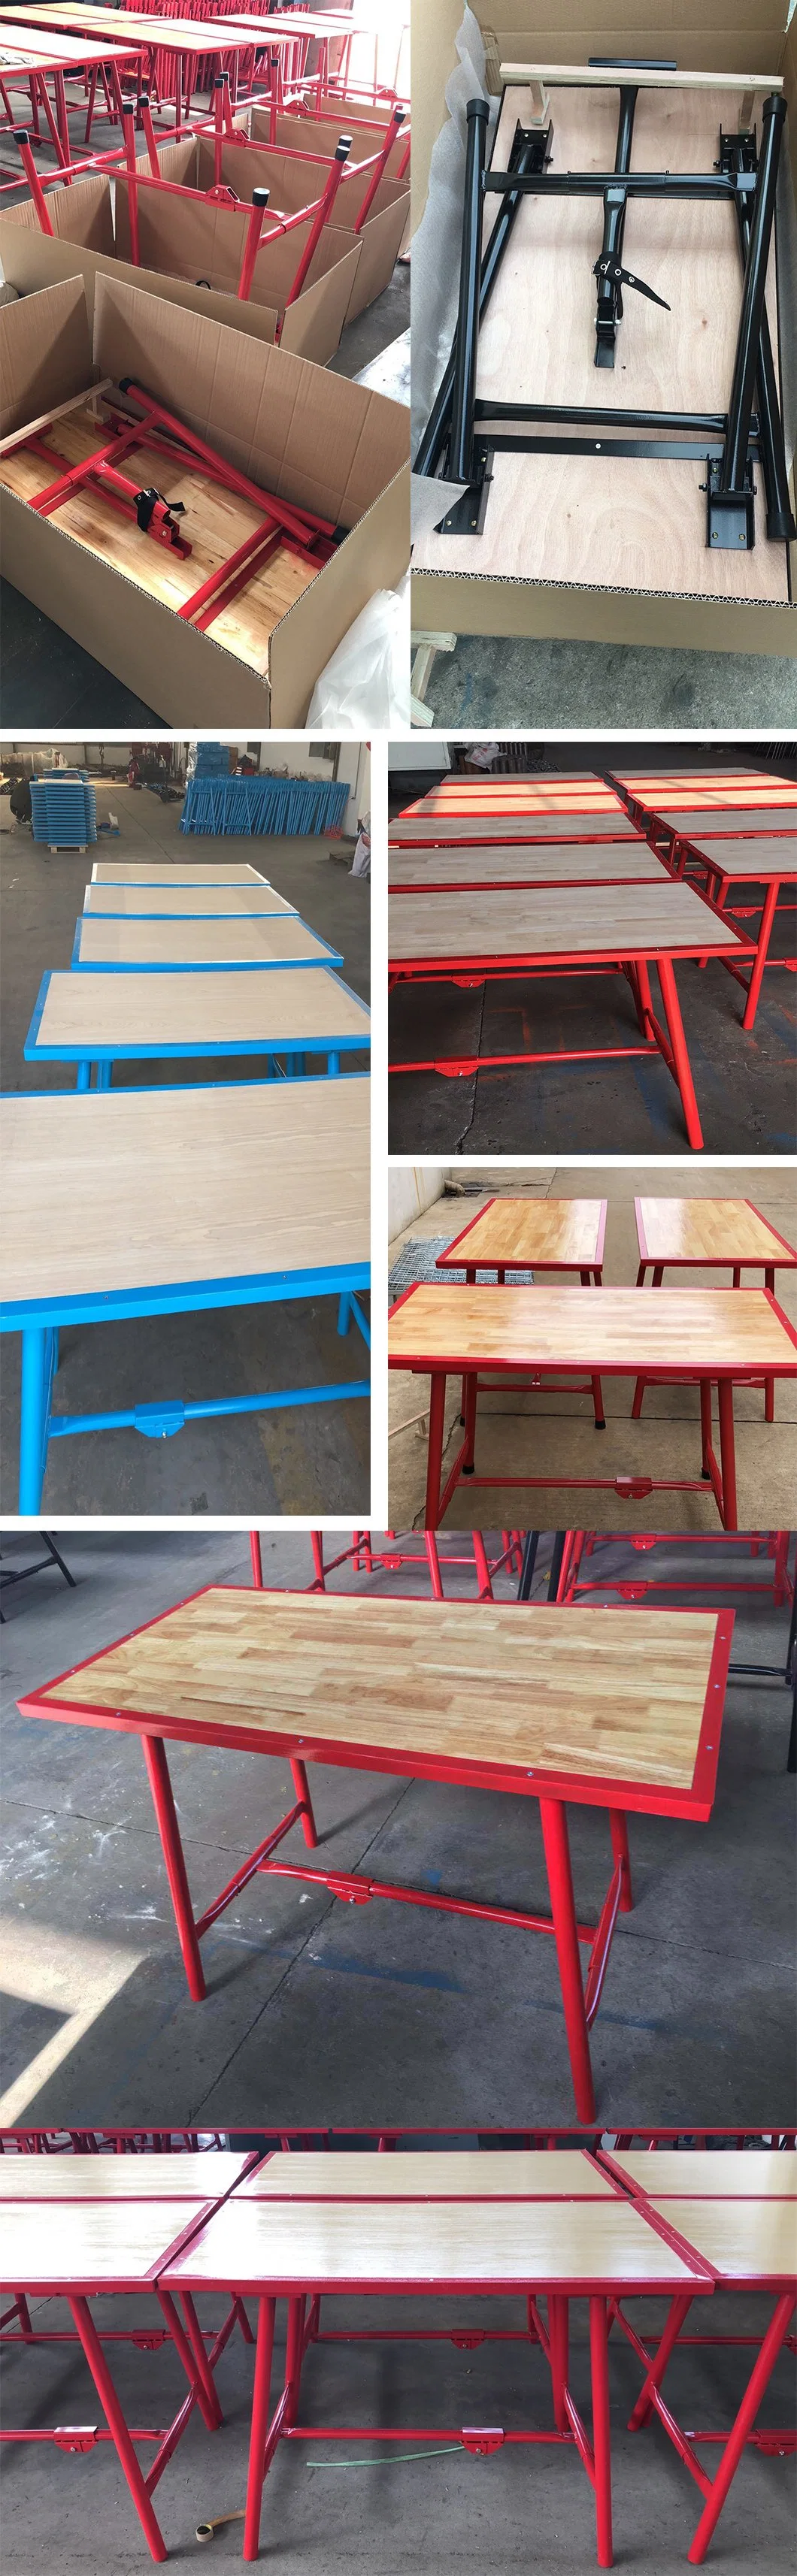 Factory OEM Portable Work Table with Legs Folding